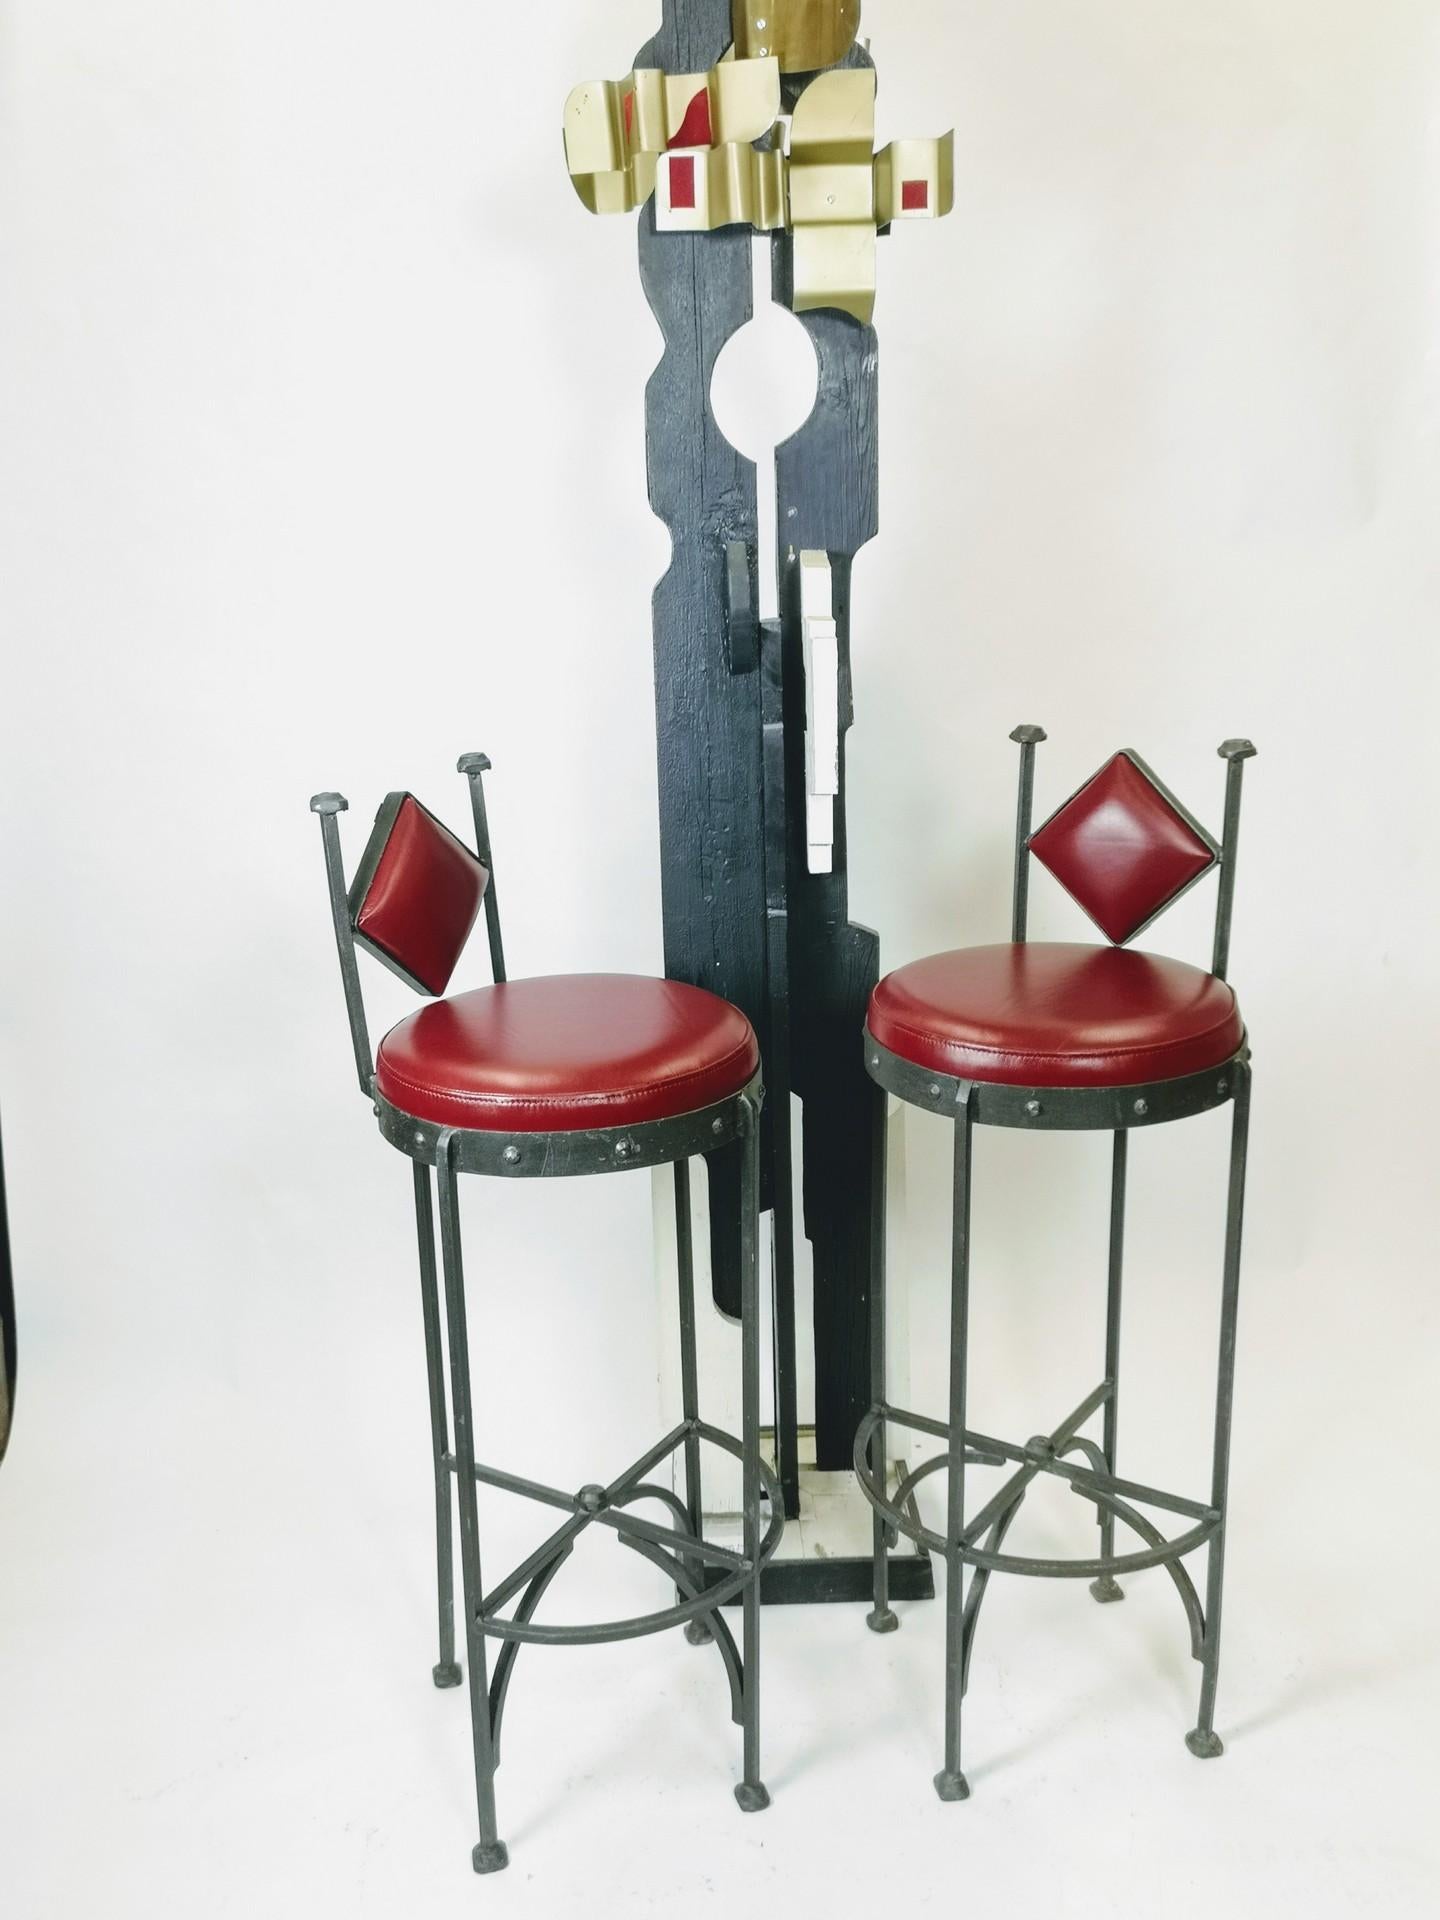 These hand-hammered and handwrought iron bar stools feature brand new cushioning and a dark red/maroon leather upholstery. They're a pair of 1970s vintage pieces.